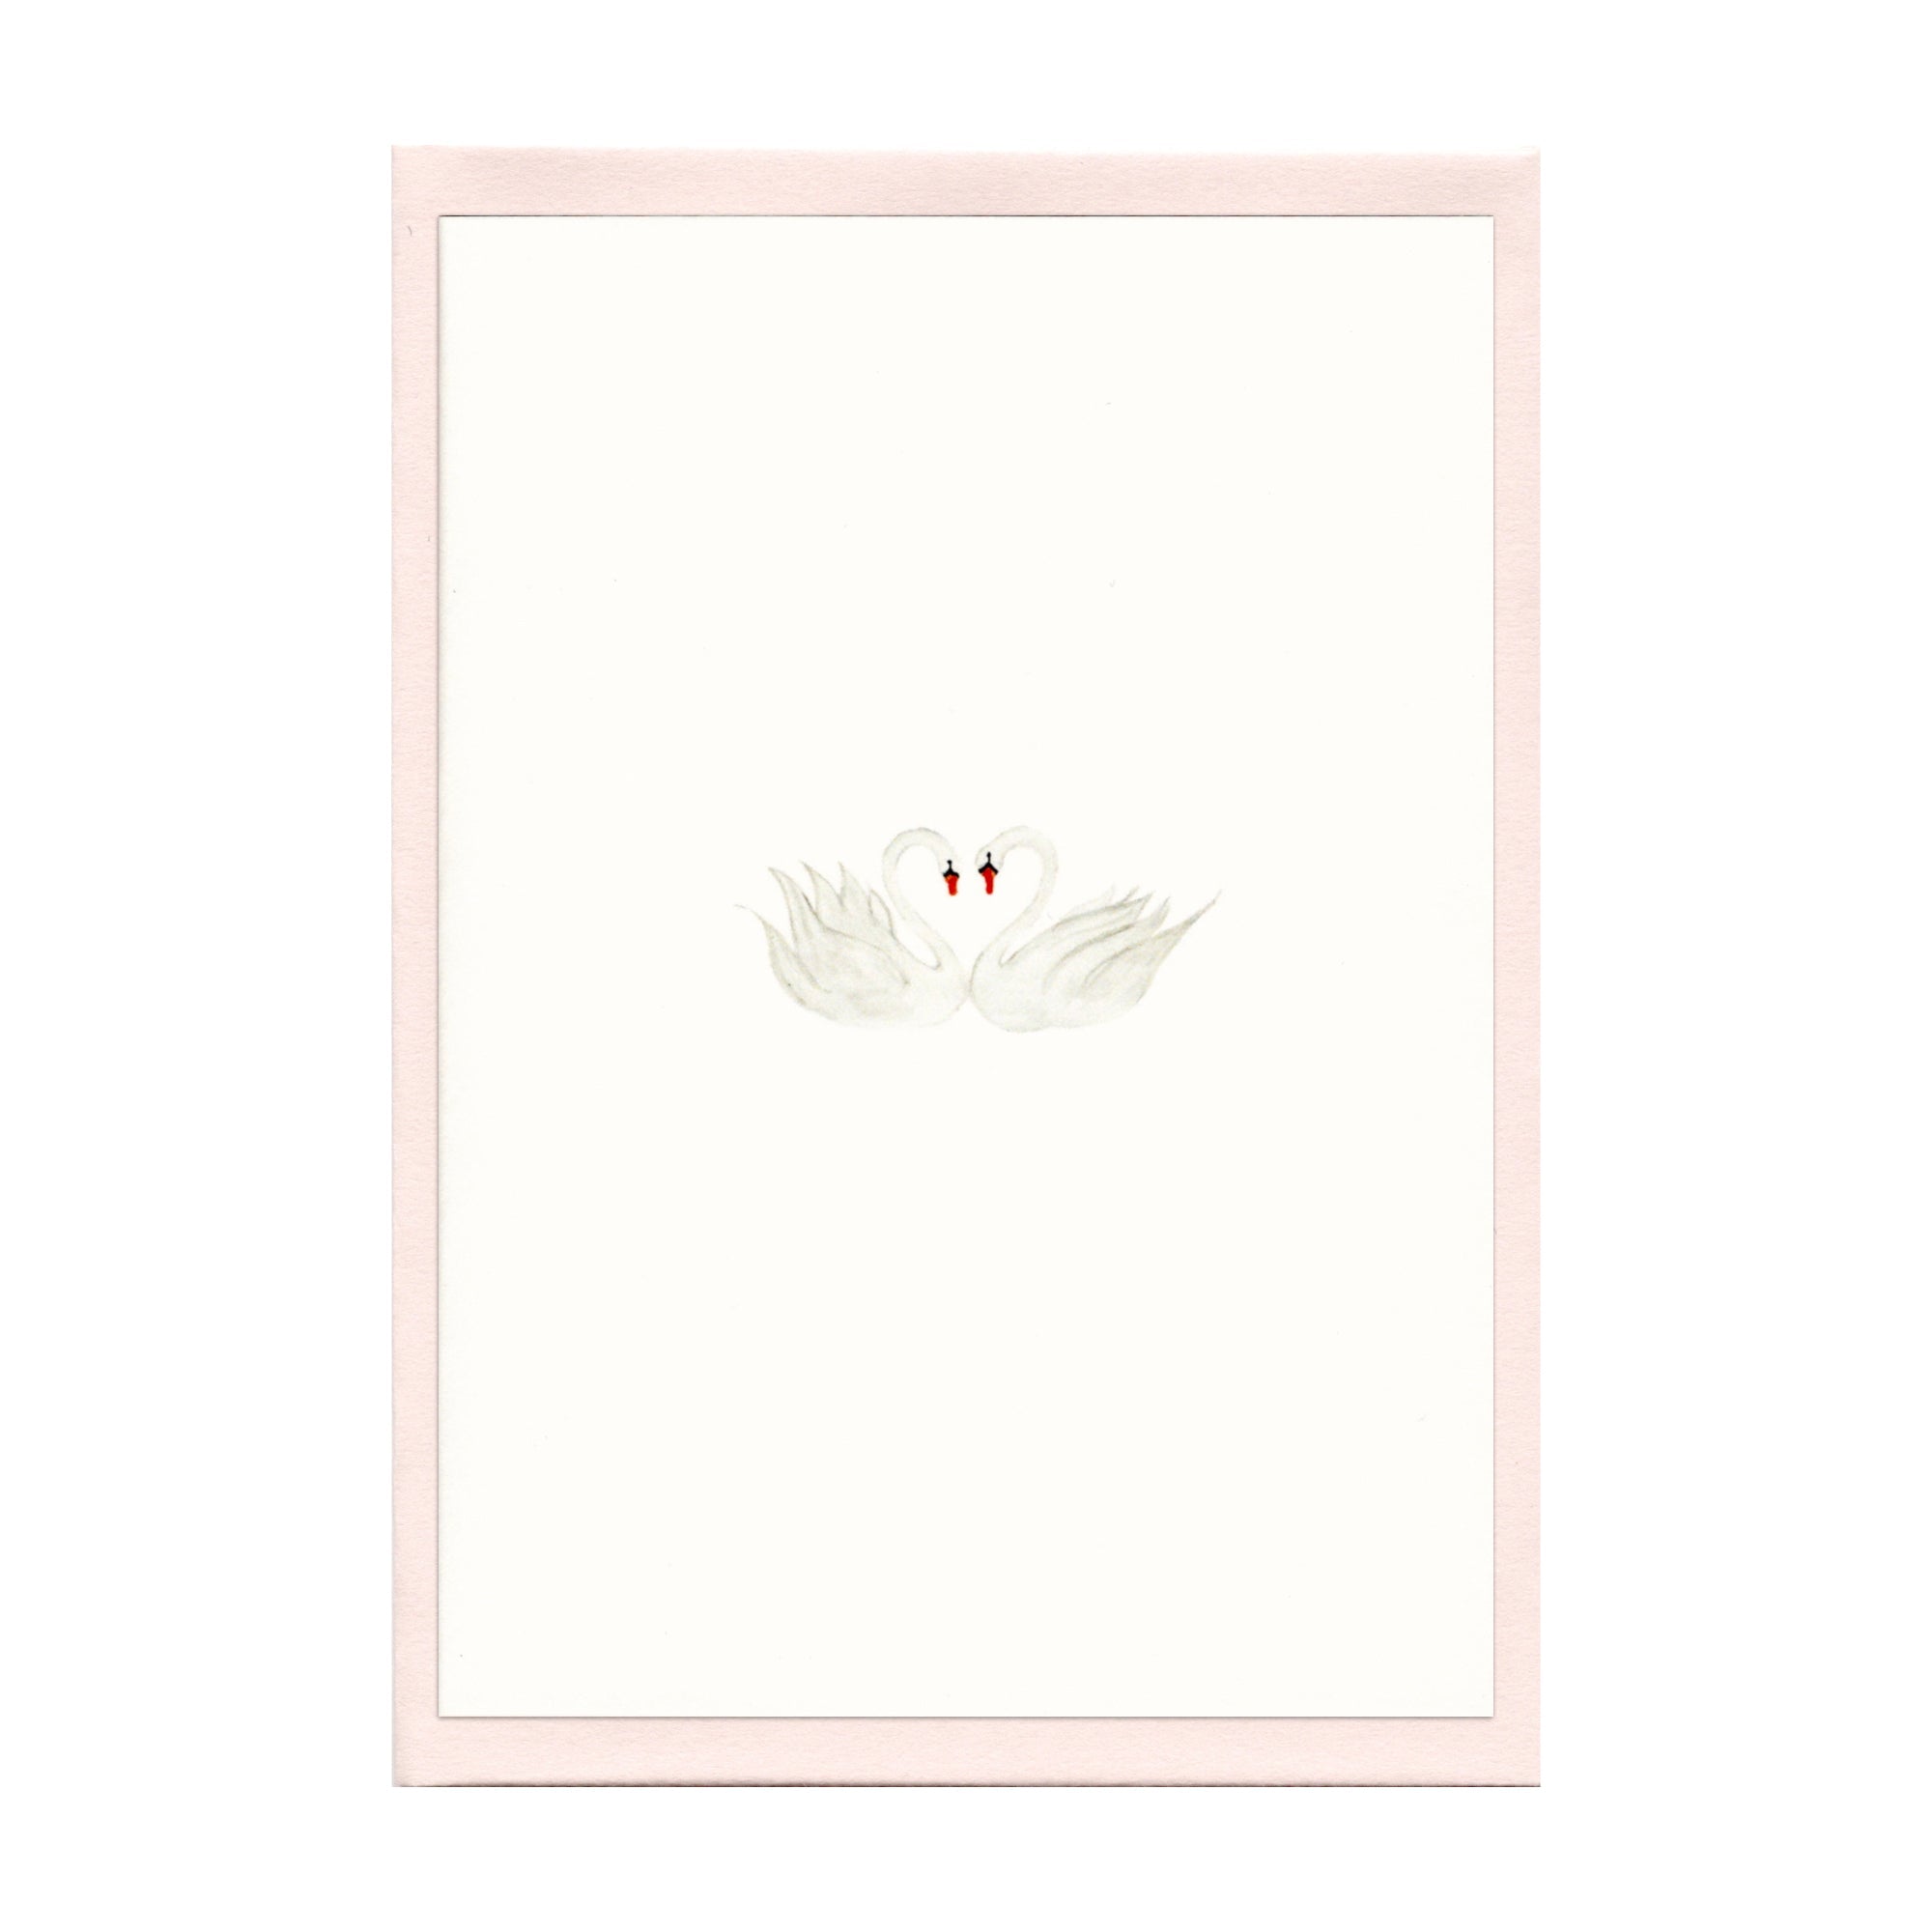 Pack of 5 Pair of Swans Cards